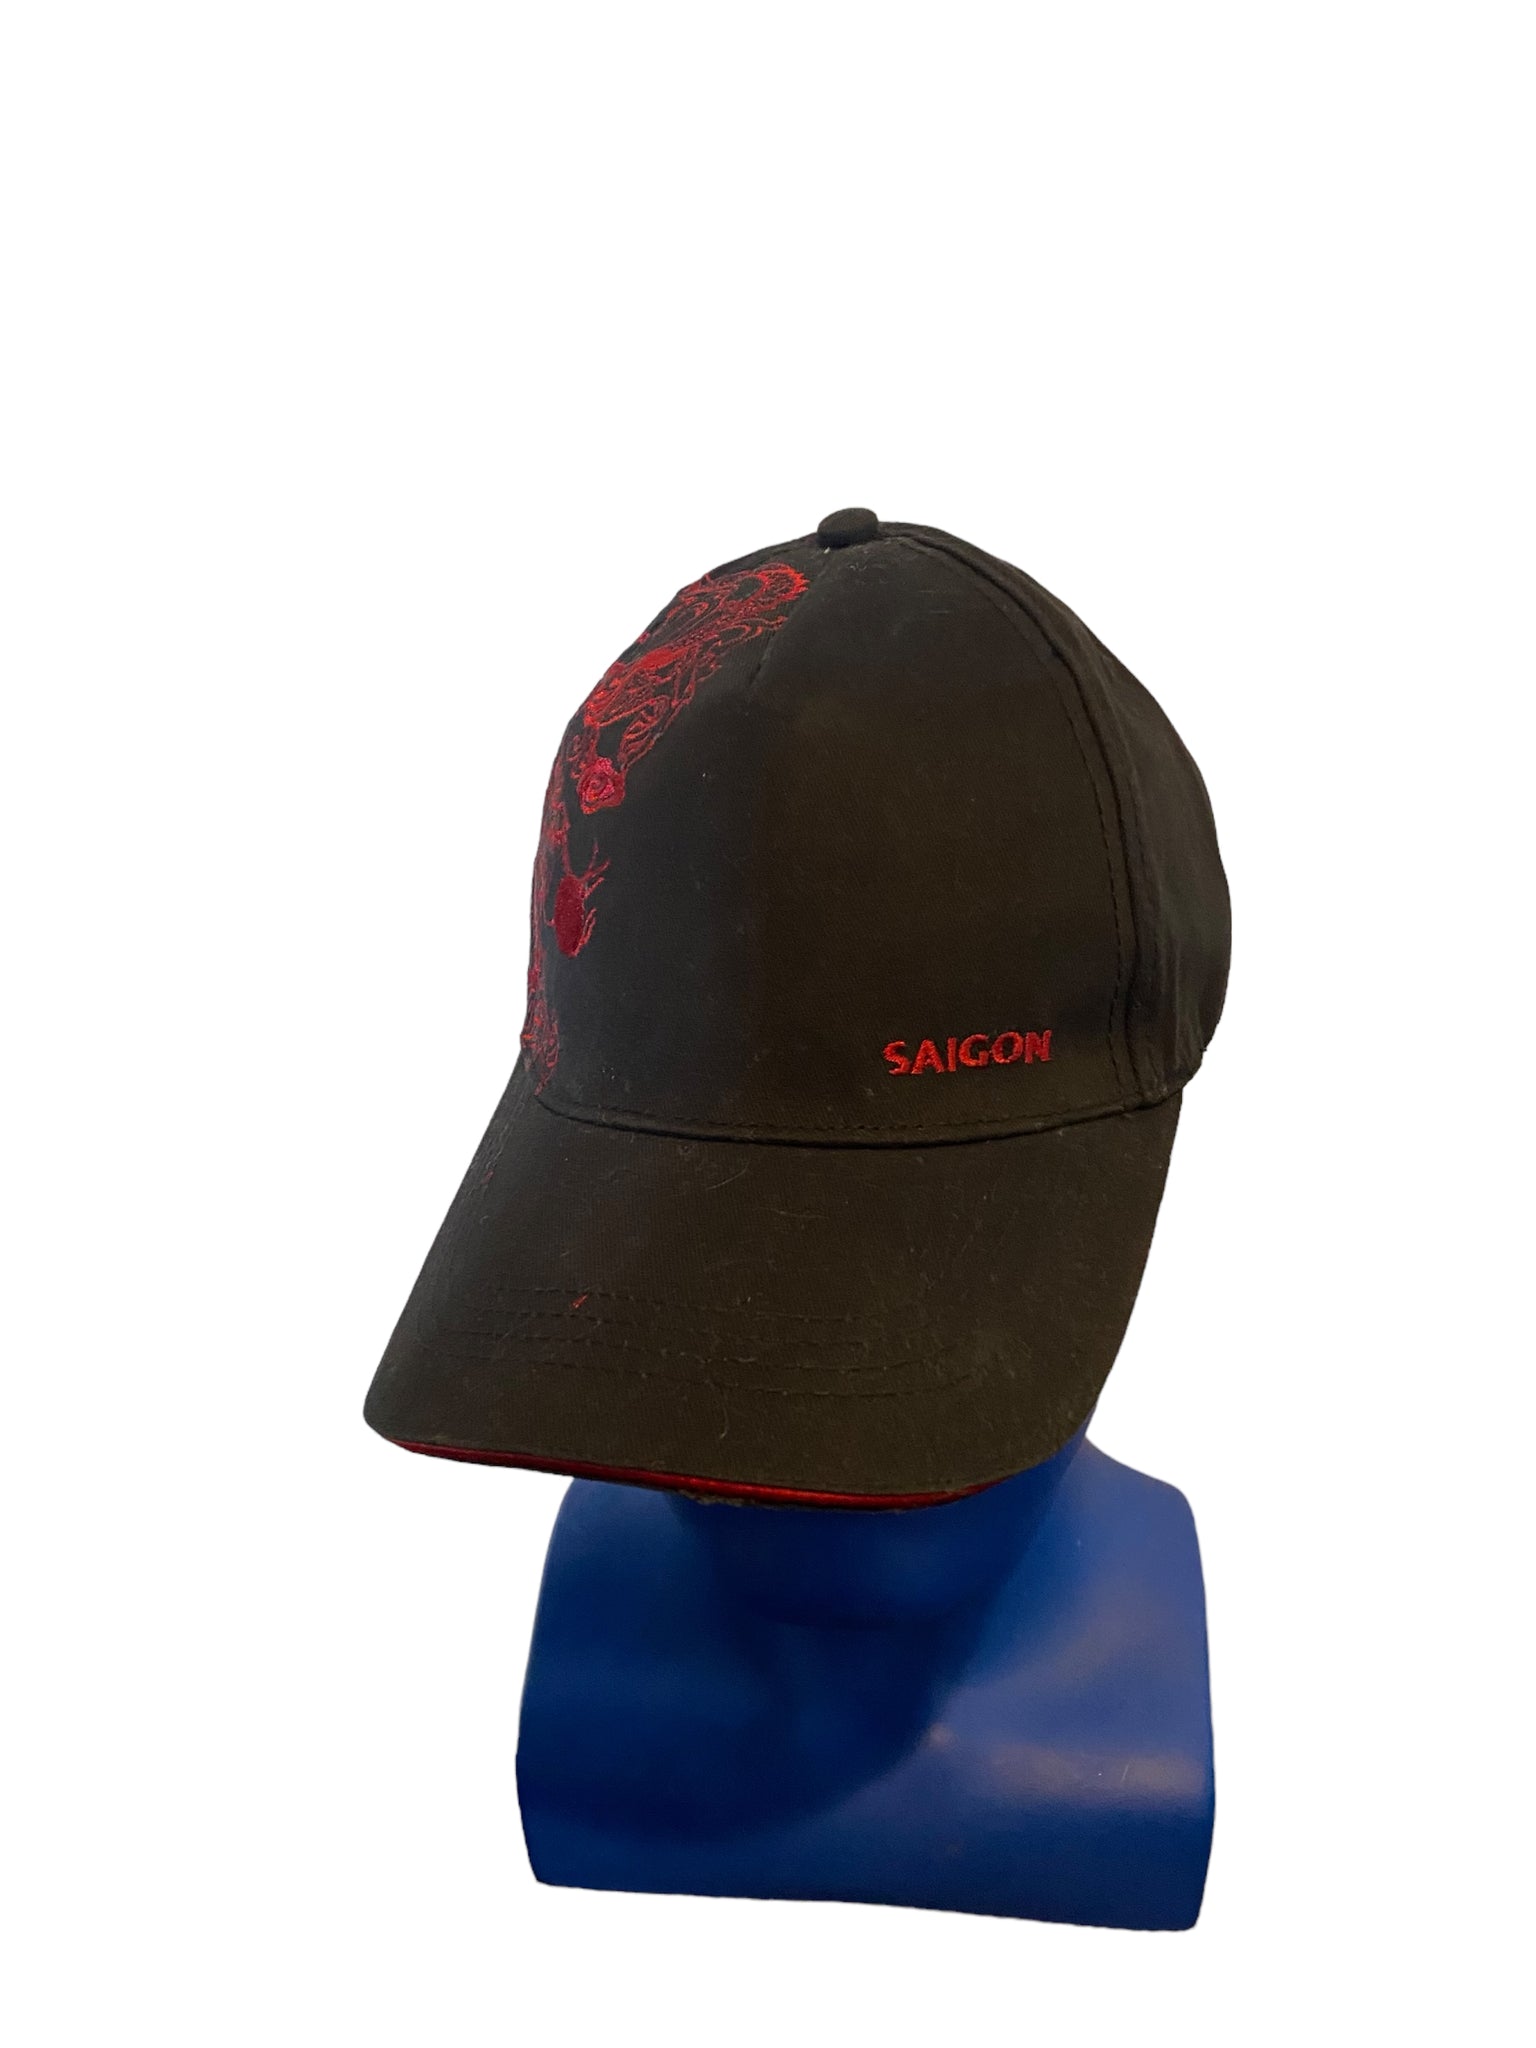 Rare hard Rock Cafe Saigon With Embroidered red dragon Adjustable Strap hat